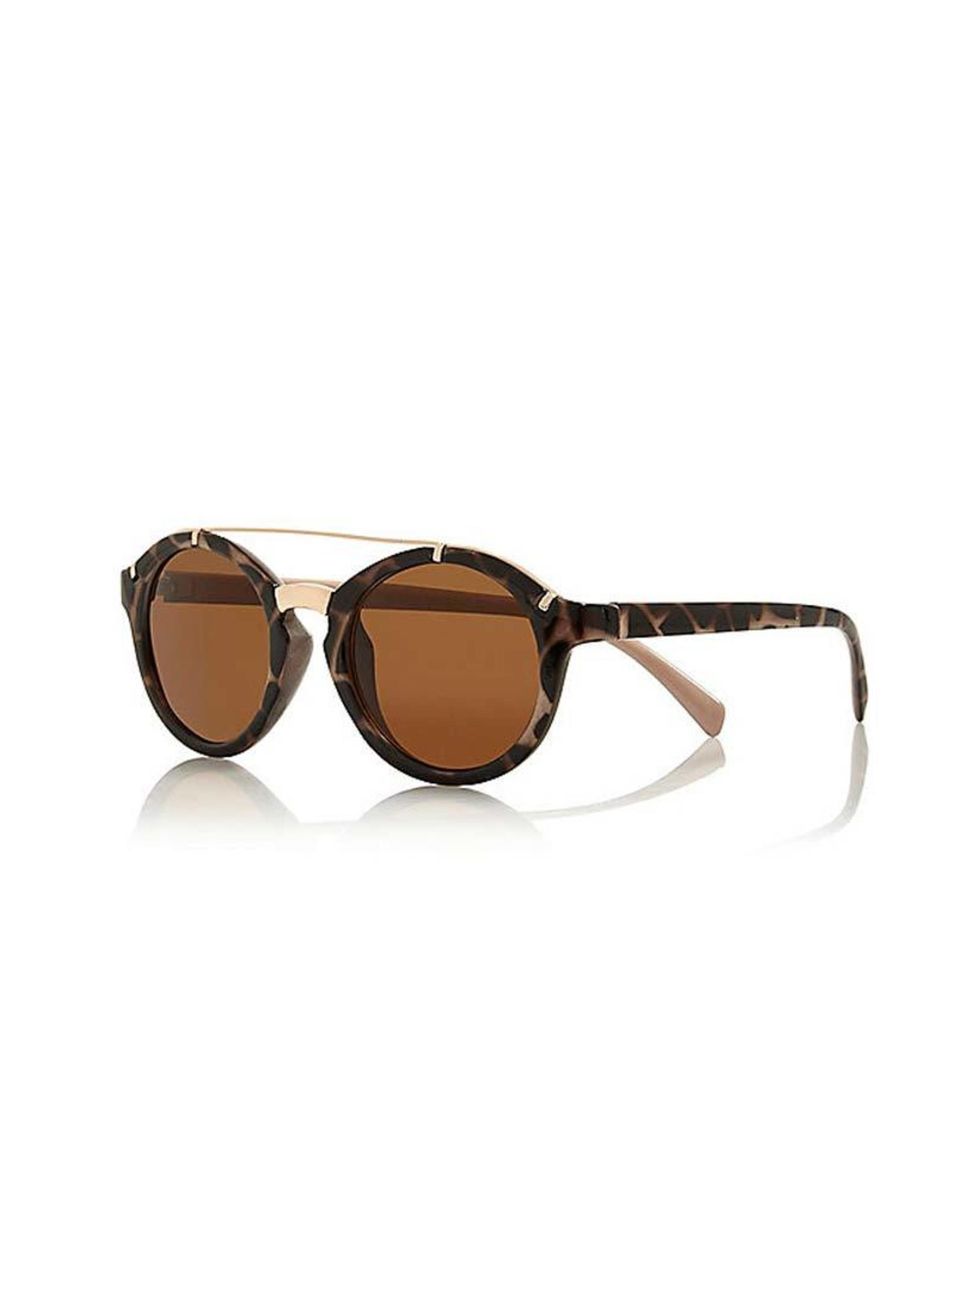 <p>Bookings Assistant Amanda Arber will pair these shades with (her signature) head-to-toe black.</p>

<p><a href="http://www.riverisland.com/women/sunglasses/round-sunglasses/brown-tortoise-shell-round-sunglasses-666375" target="_blank">River Island</a> 